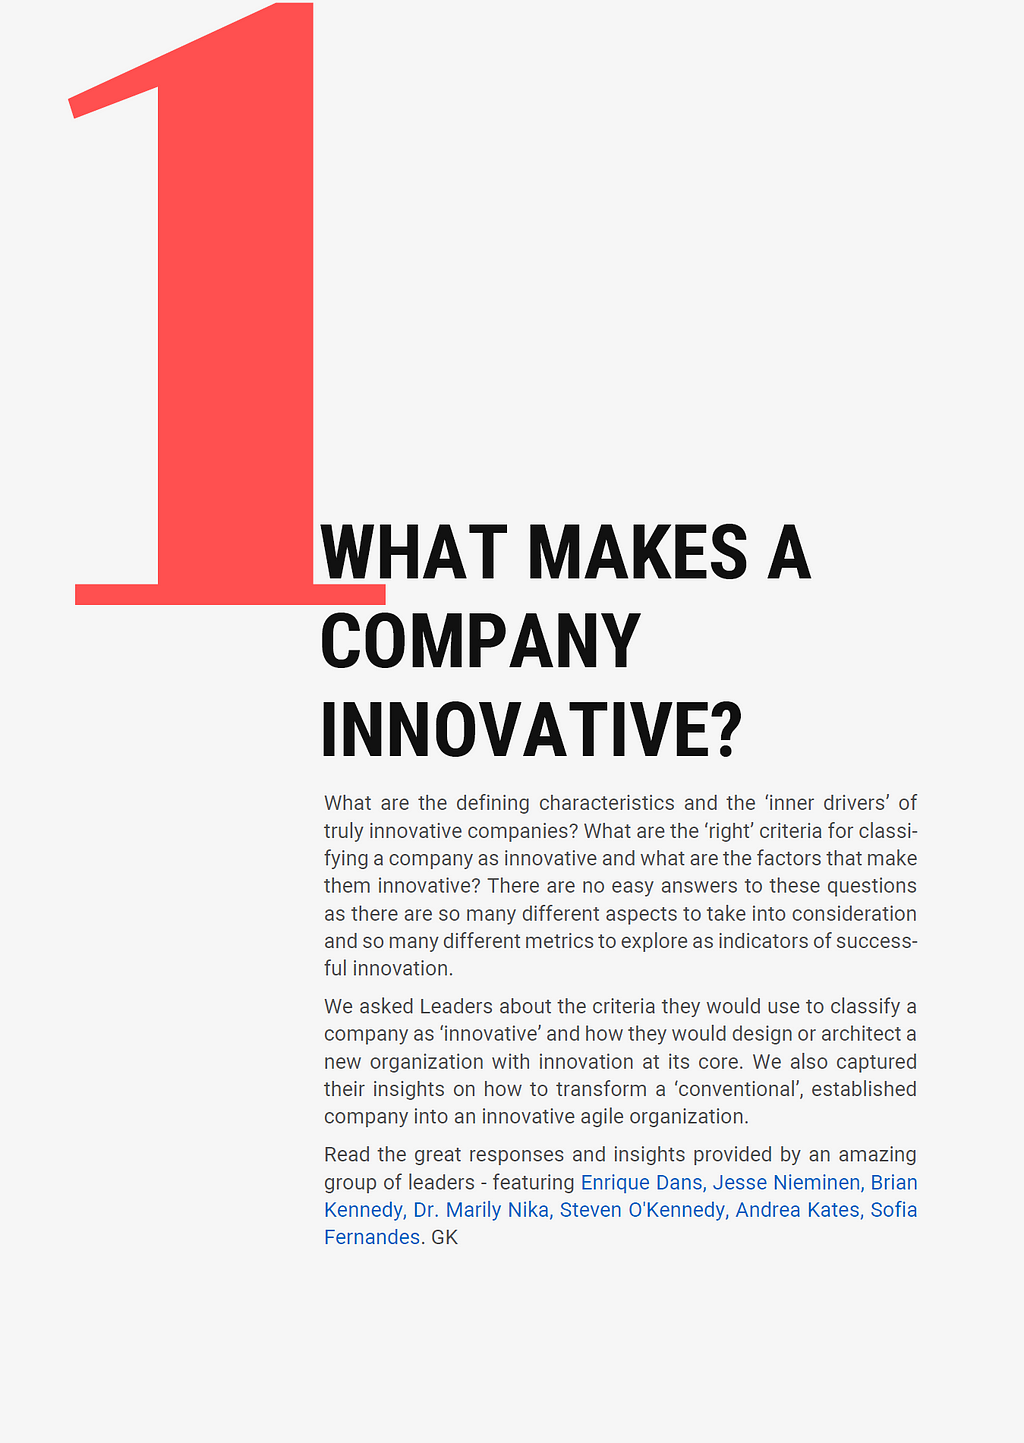 What makes a company innovative — 60 leaders on innovation